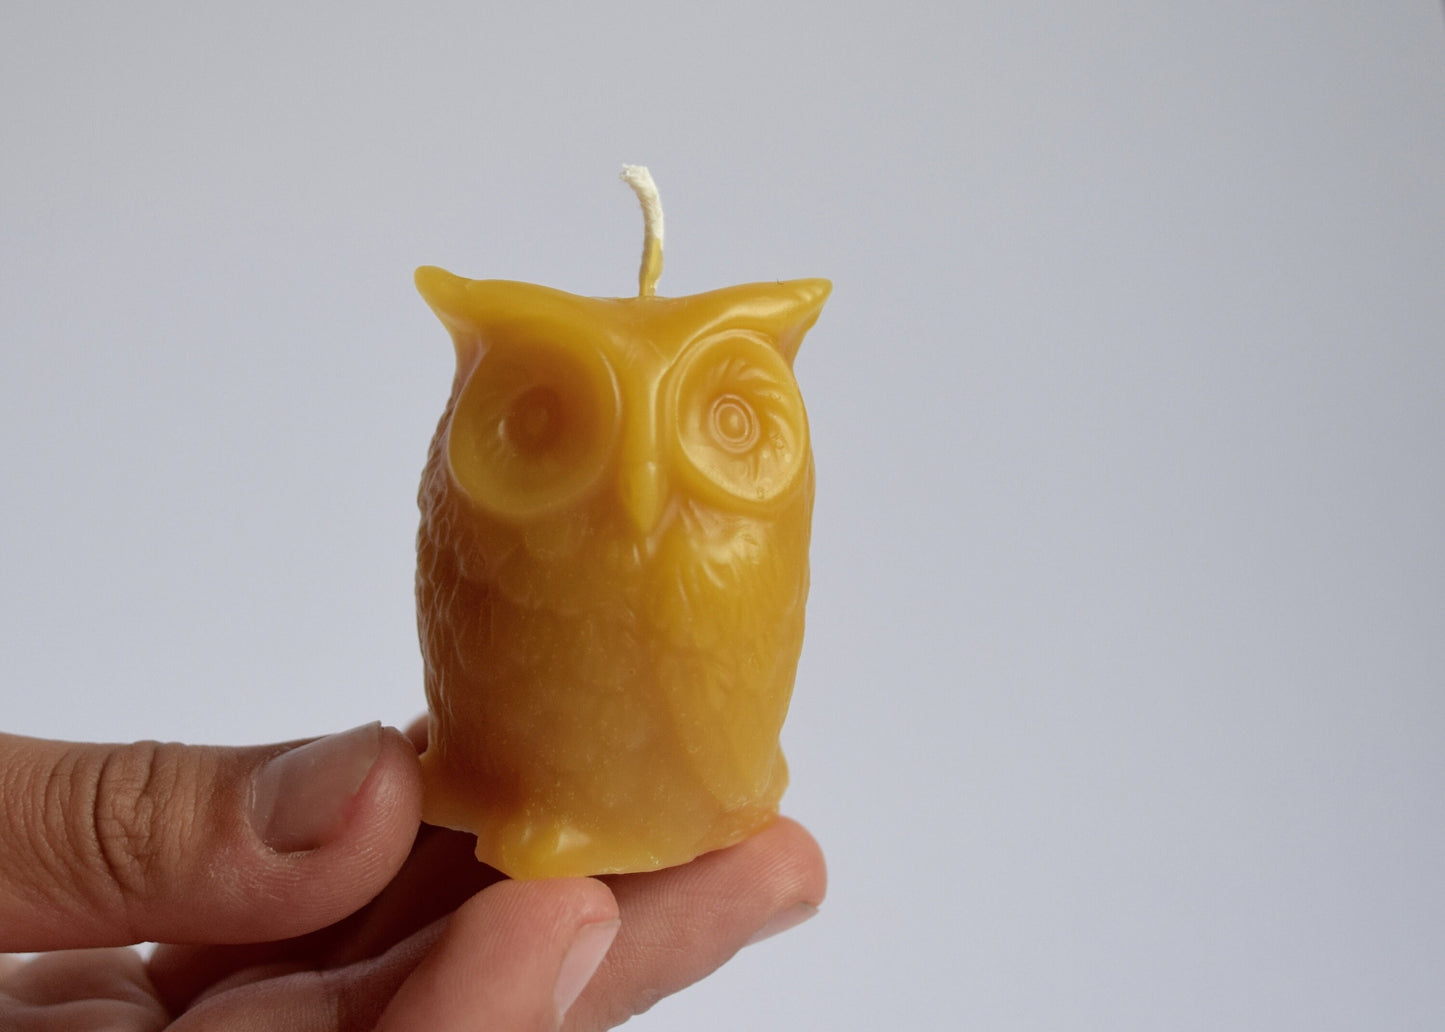 Owl Beeswax Candle, Wedding Favors // Owl, Votive Candle, Beeswax, Candle, Eco Friendly, Wedding, Handcrafted